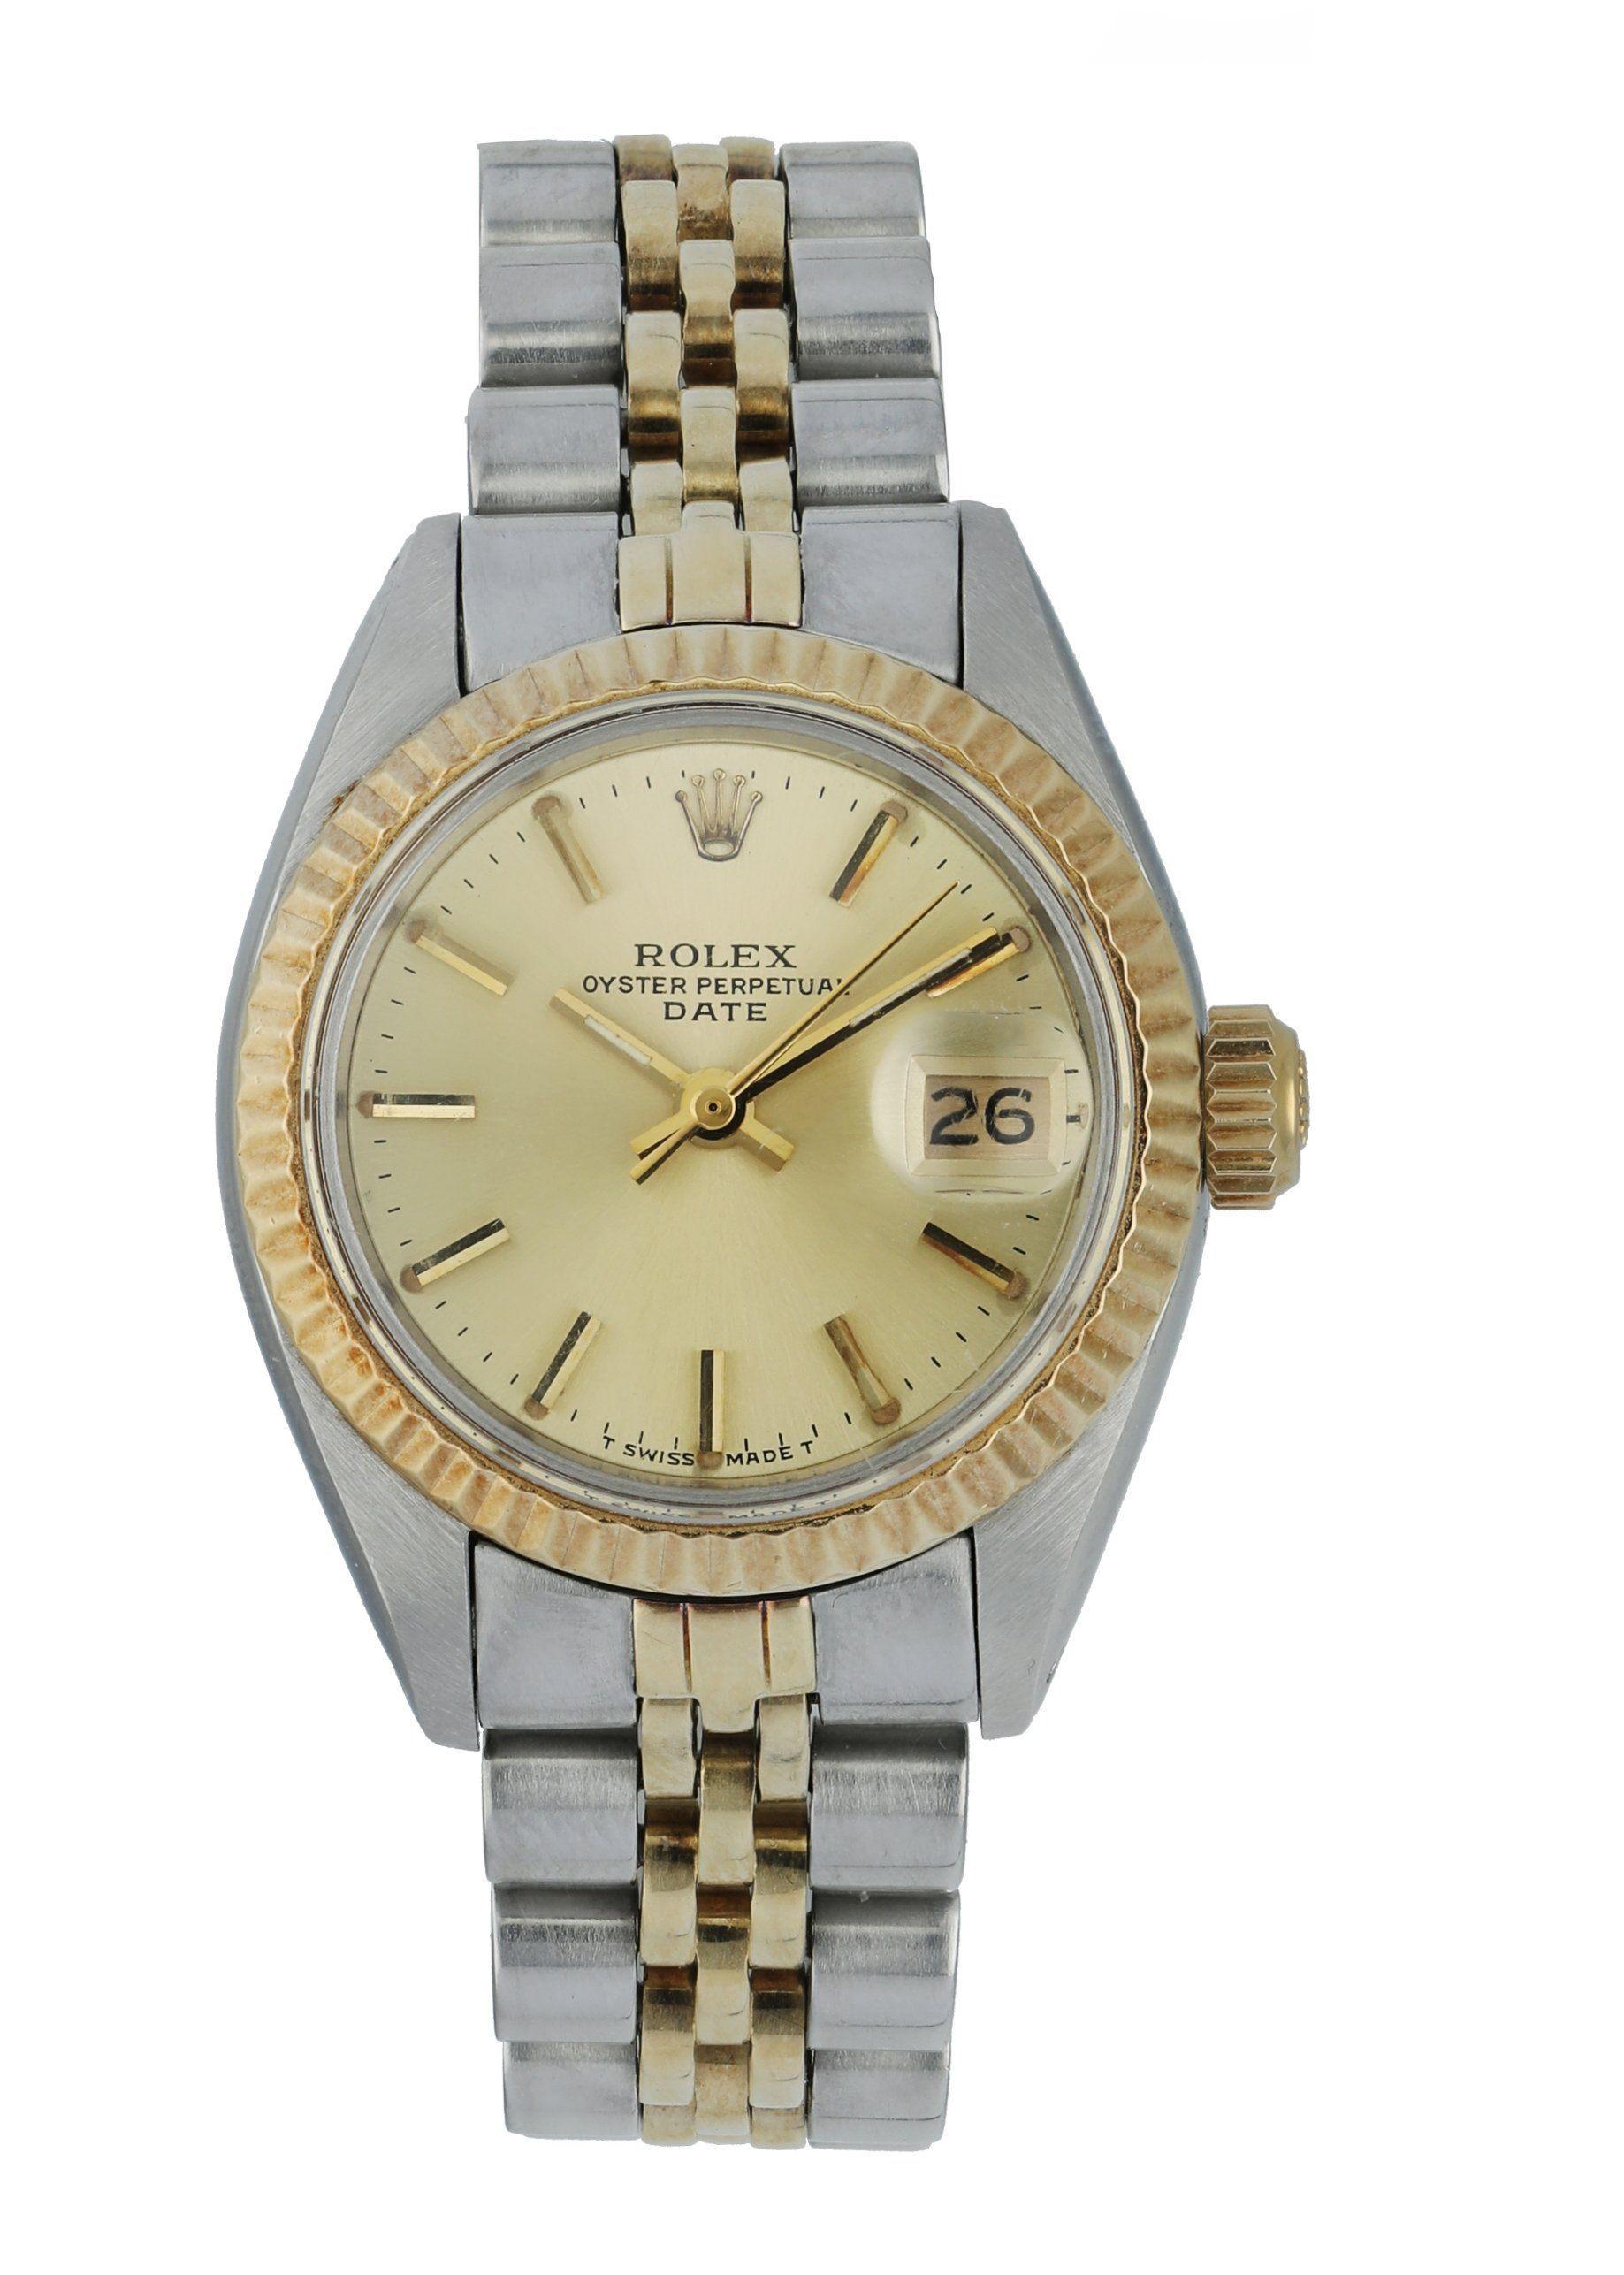 Rolex Oyster Perpetual Date 6917 Ladies Watch
26mm Stainless Steel case. 
Yellow Gold Stationary bezel. 
Off-White dial with gold hands and index hour markers. 
Minute markers on the outer dial. 
Date display at the 3 o'clock position. 
Stainless